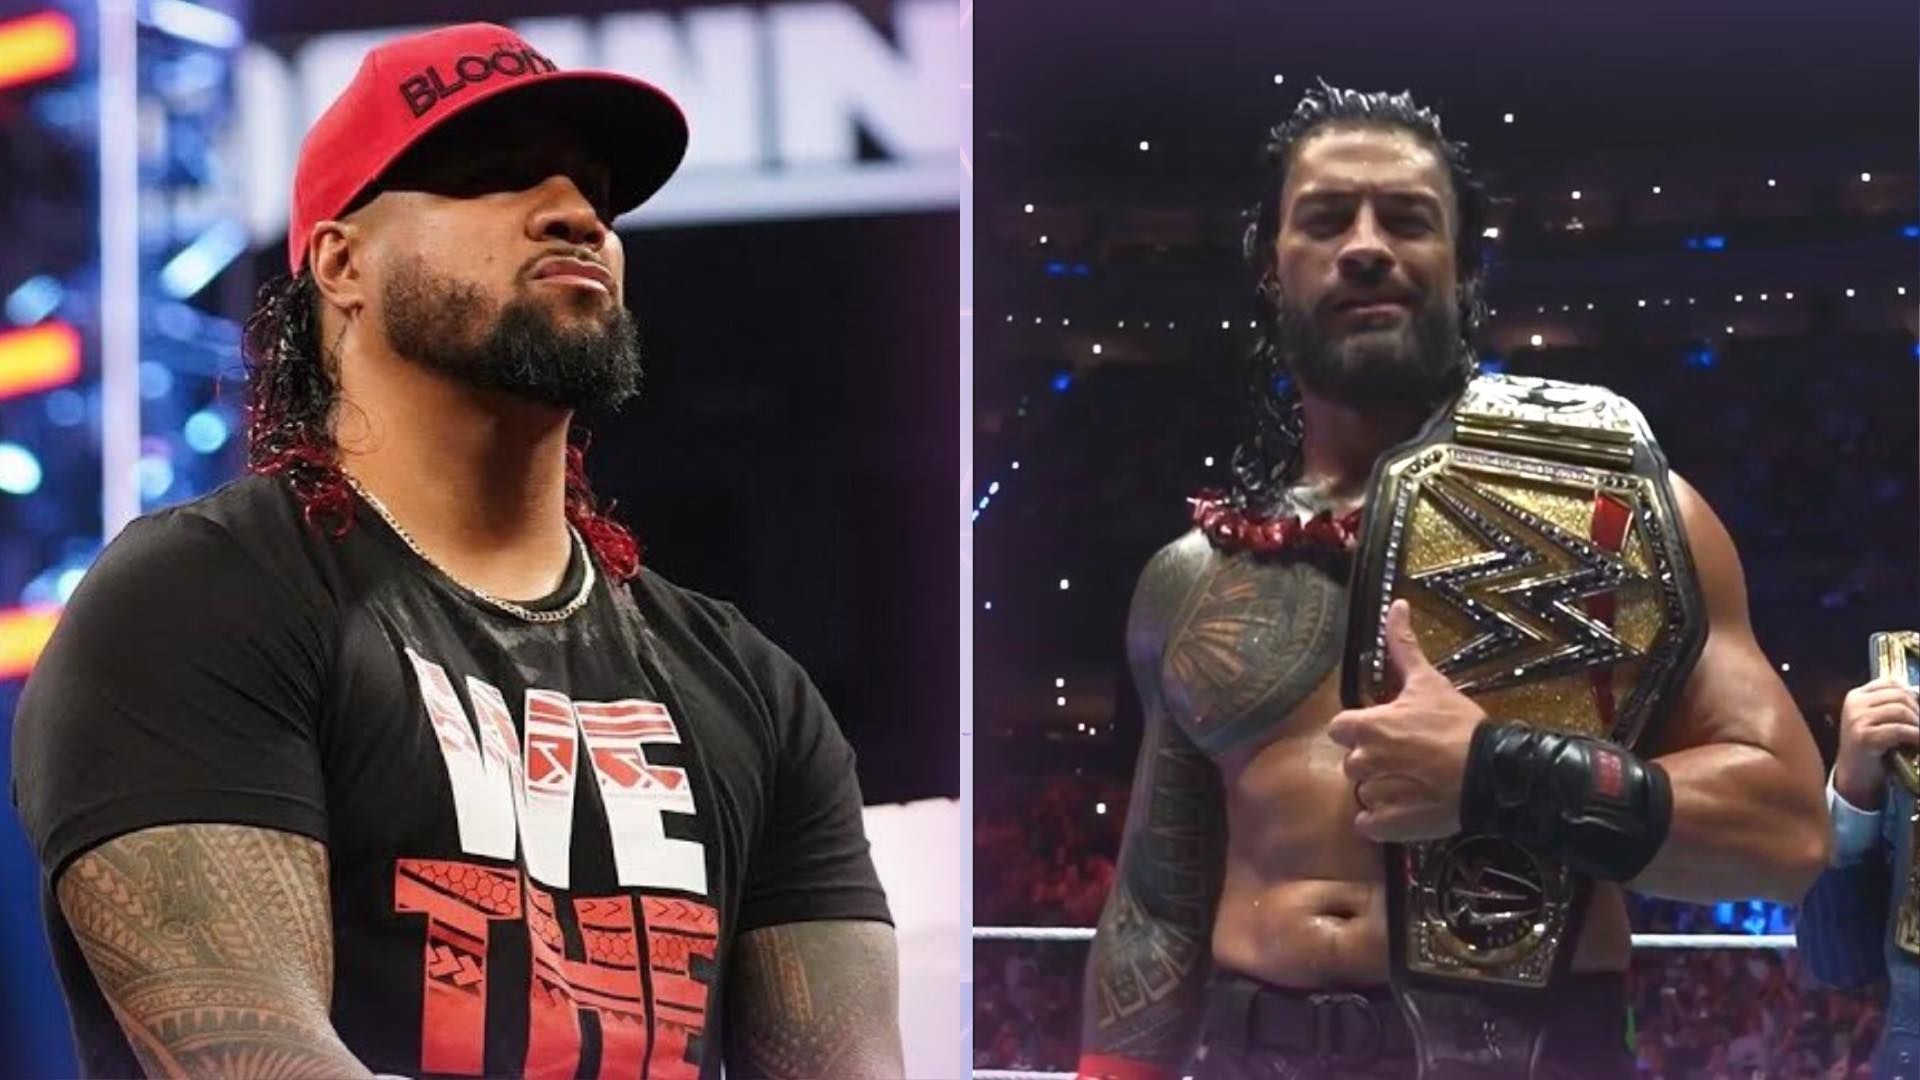 Jimmy Uso is currently out of action after a brutal attack on WWE SmackDown